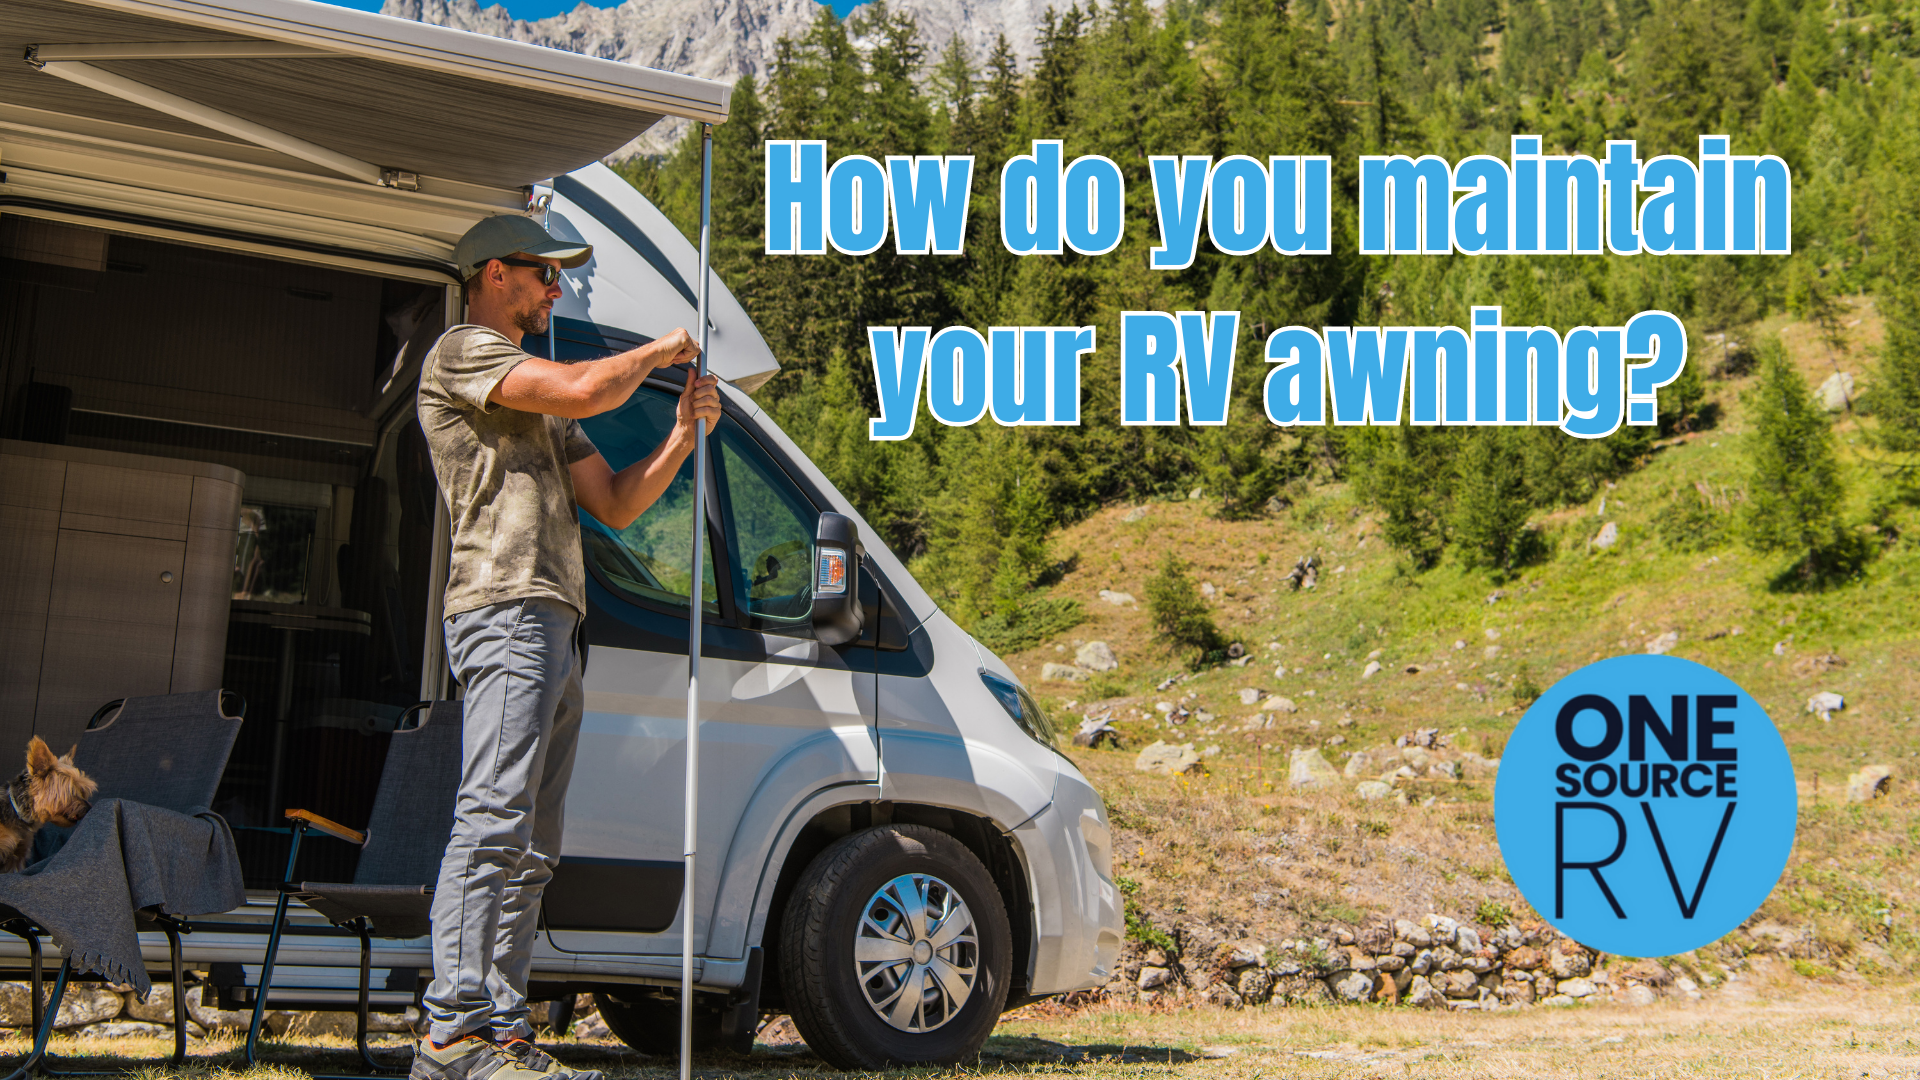 How do you maintain your RV awning?